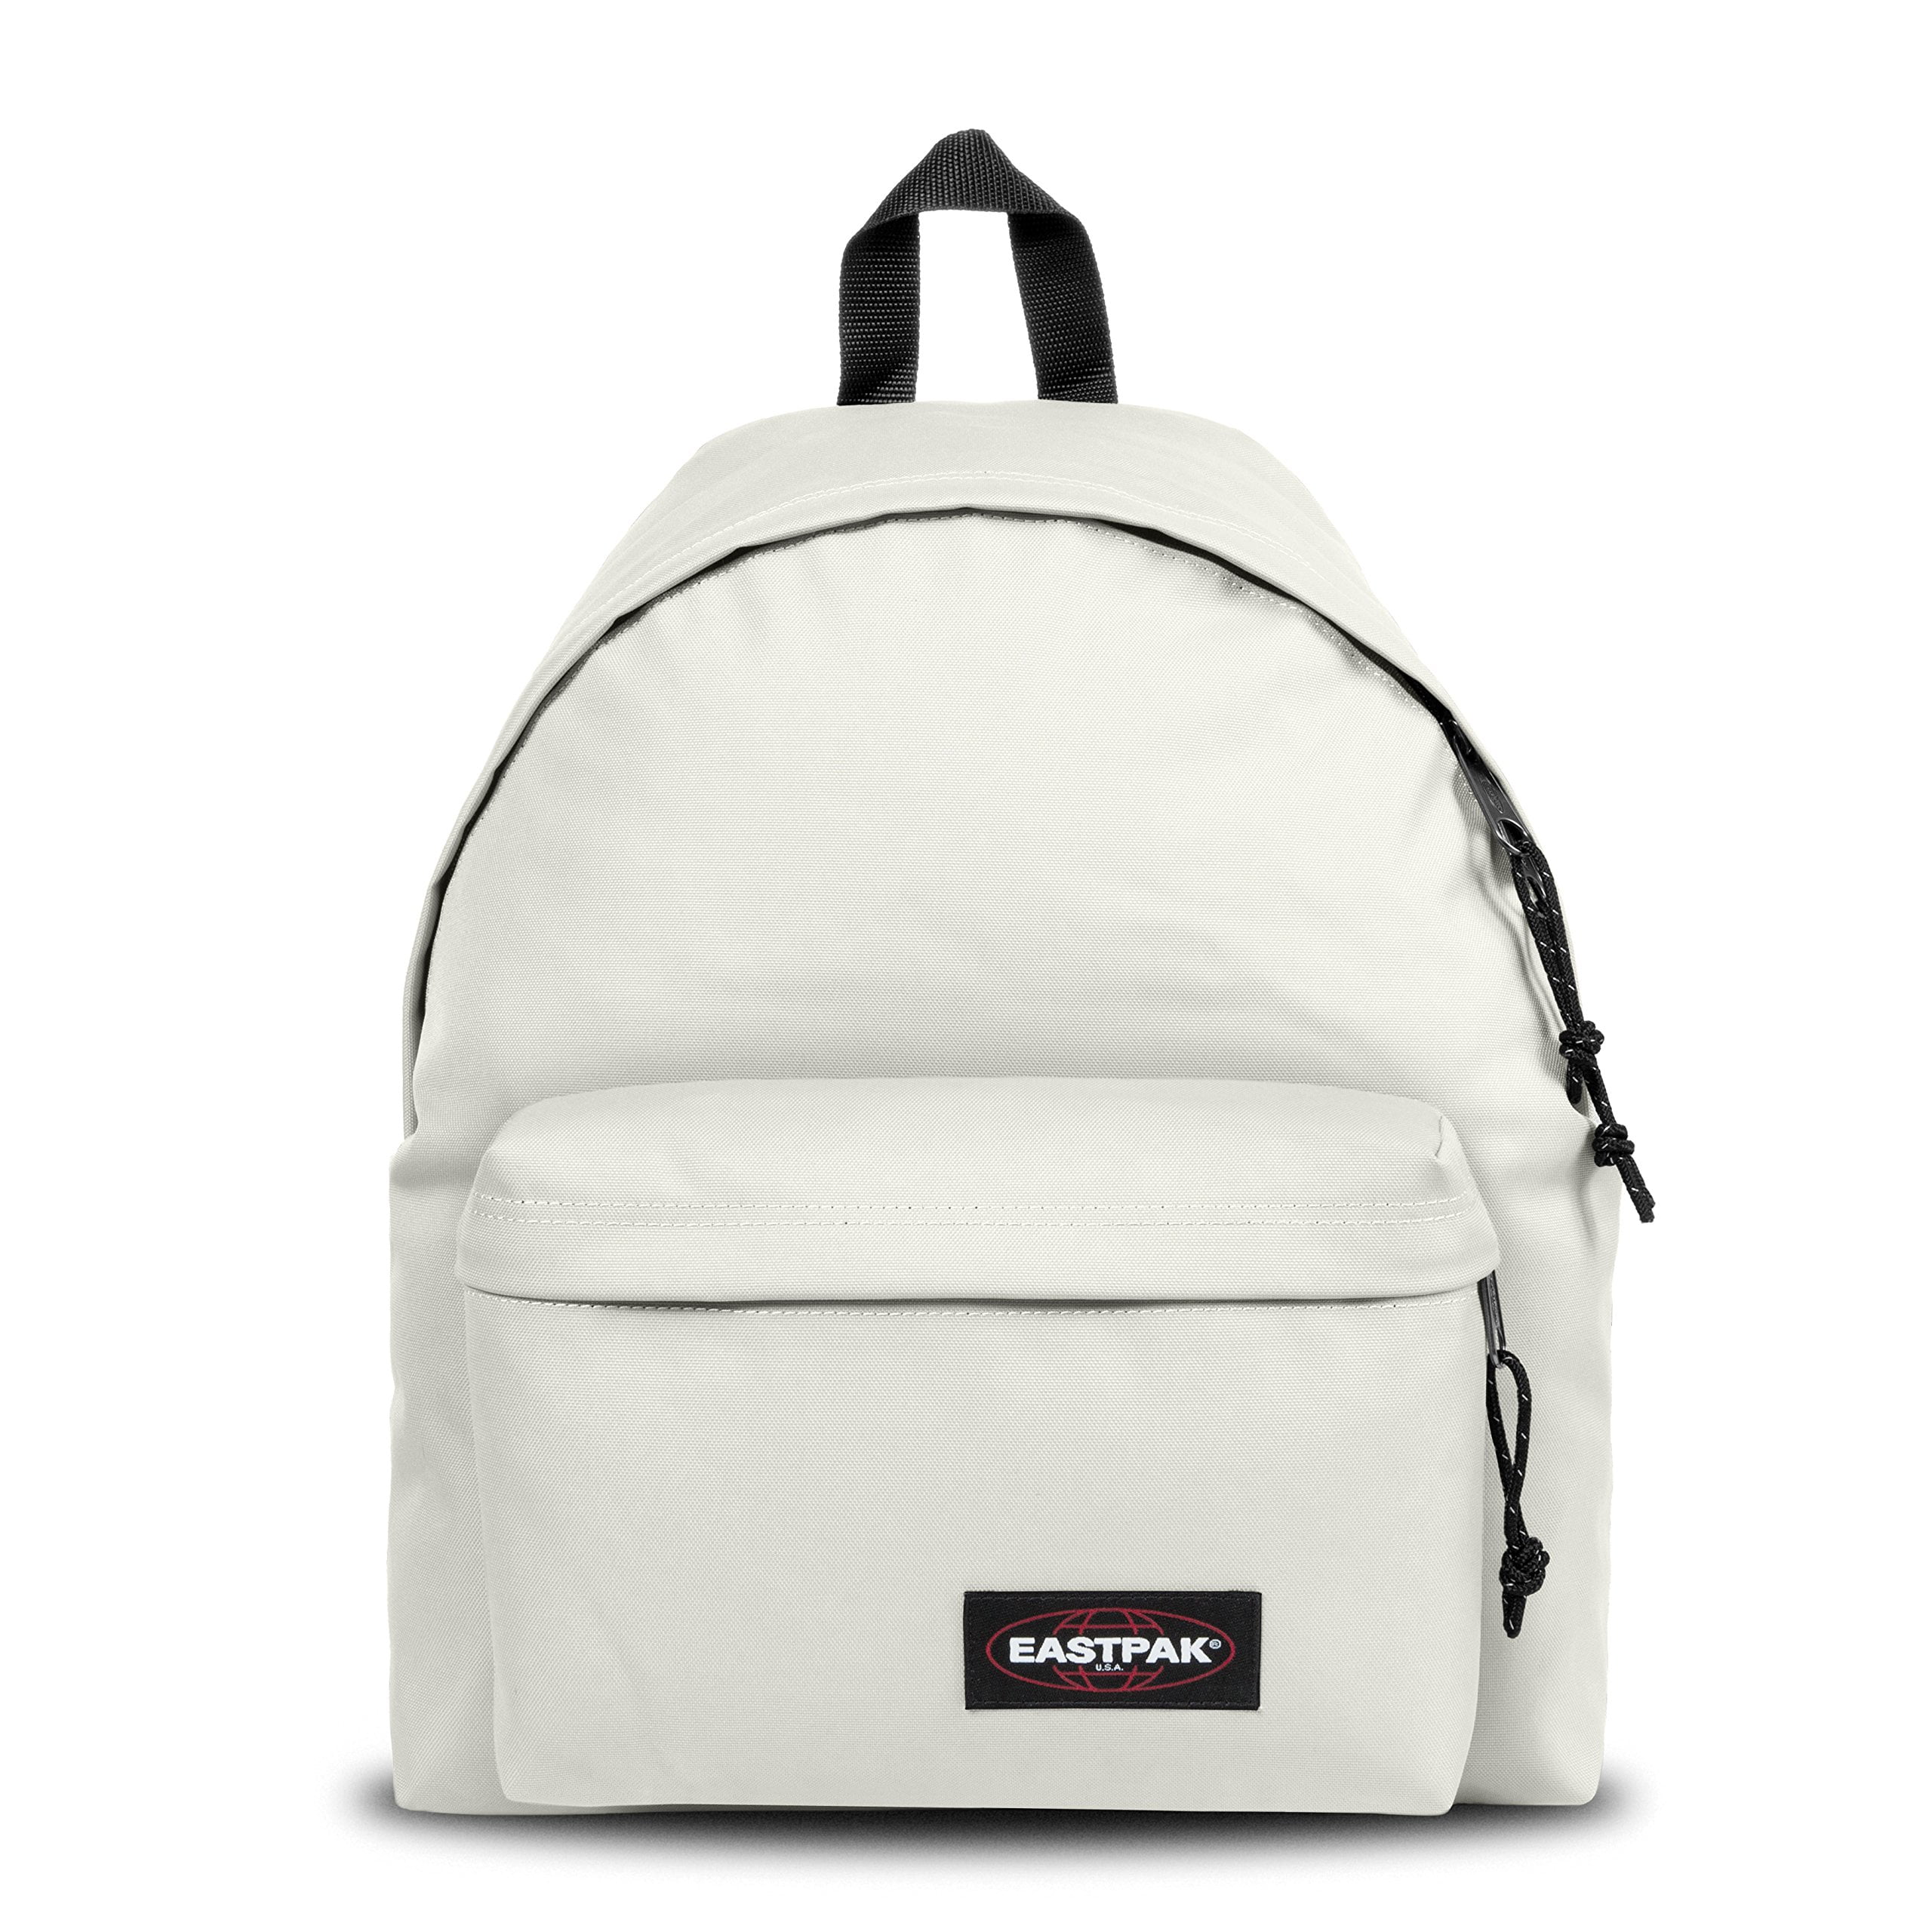 My Eastpak which has been my one and only backpack ever. Lasted 12 years so  far : r/BuyItForLife